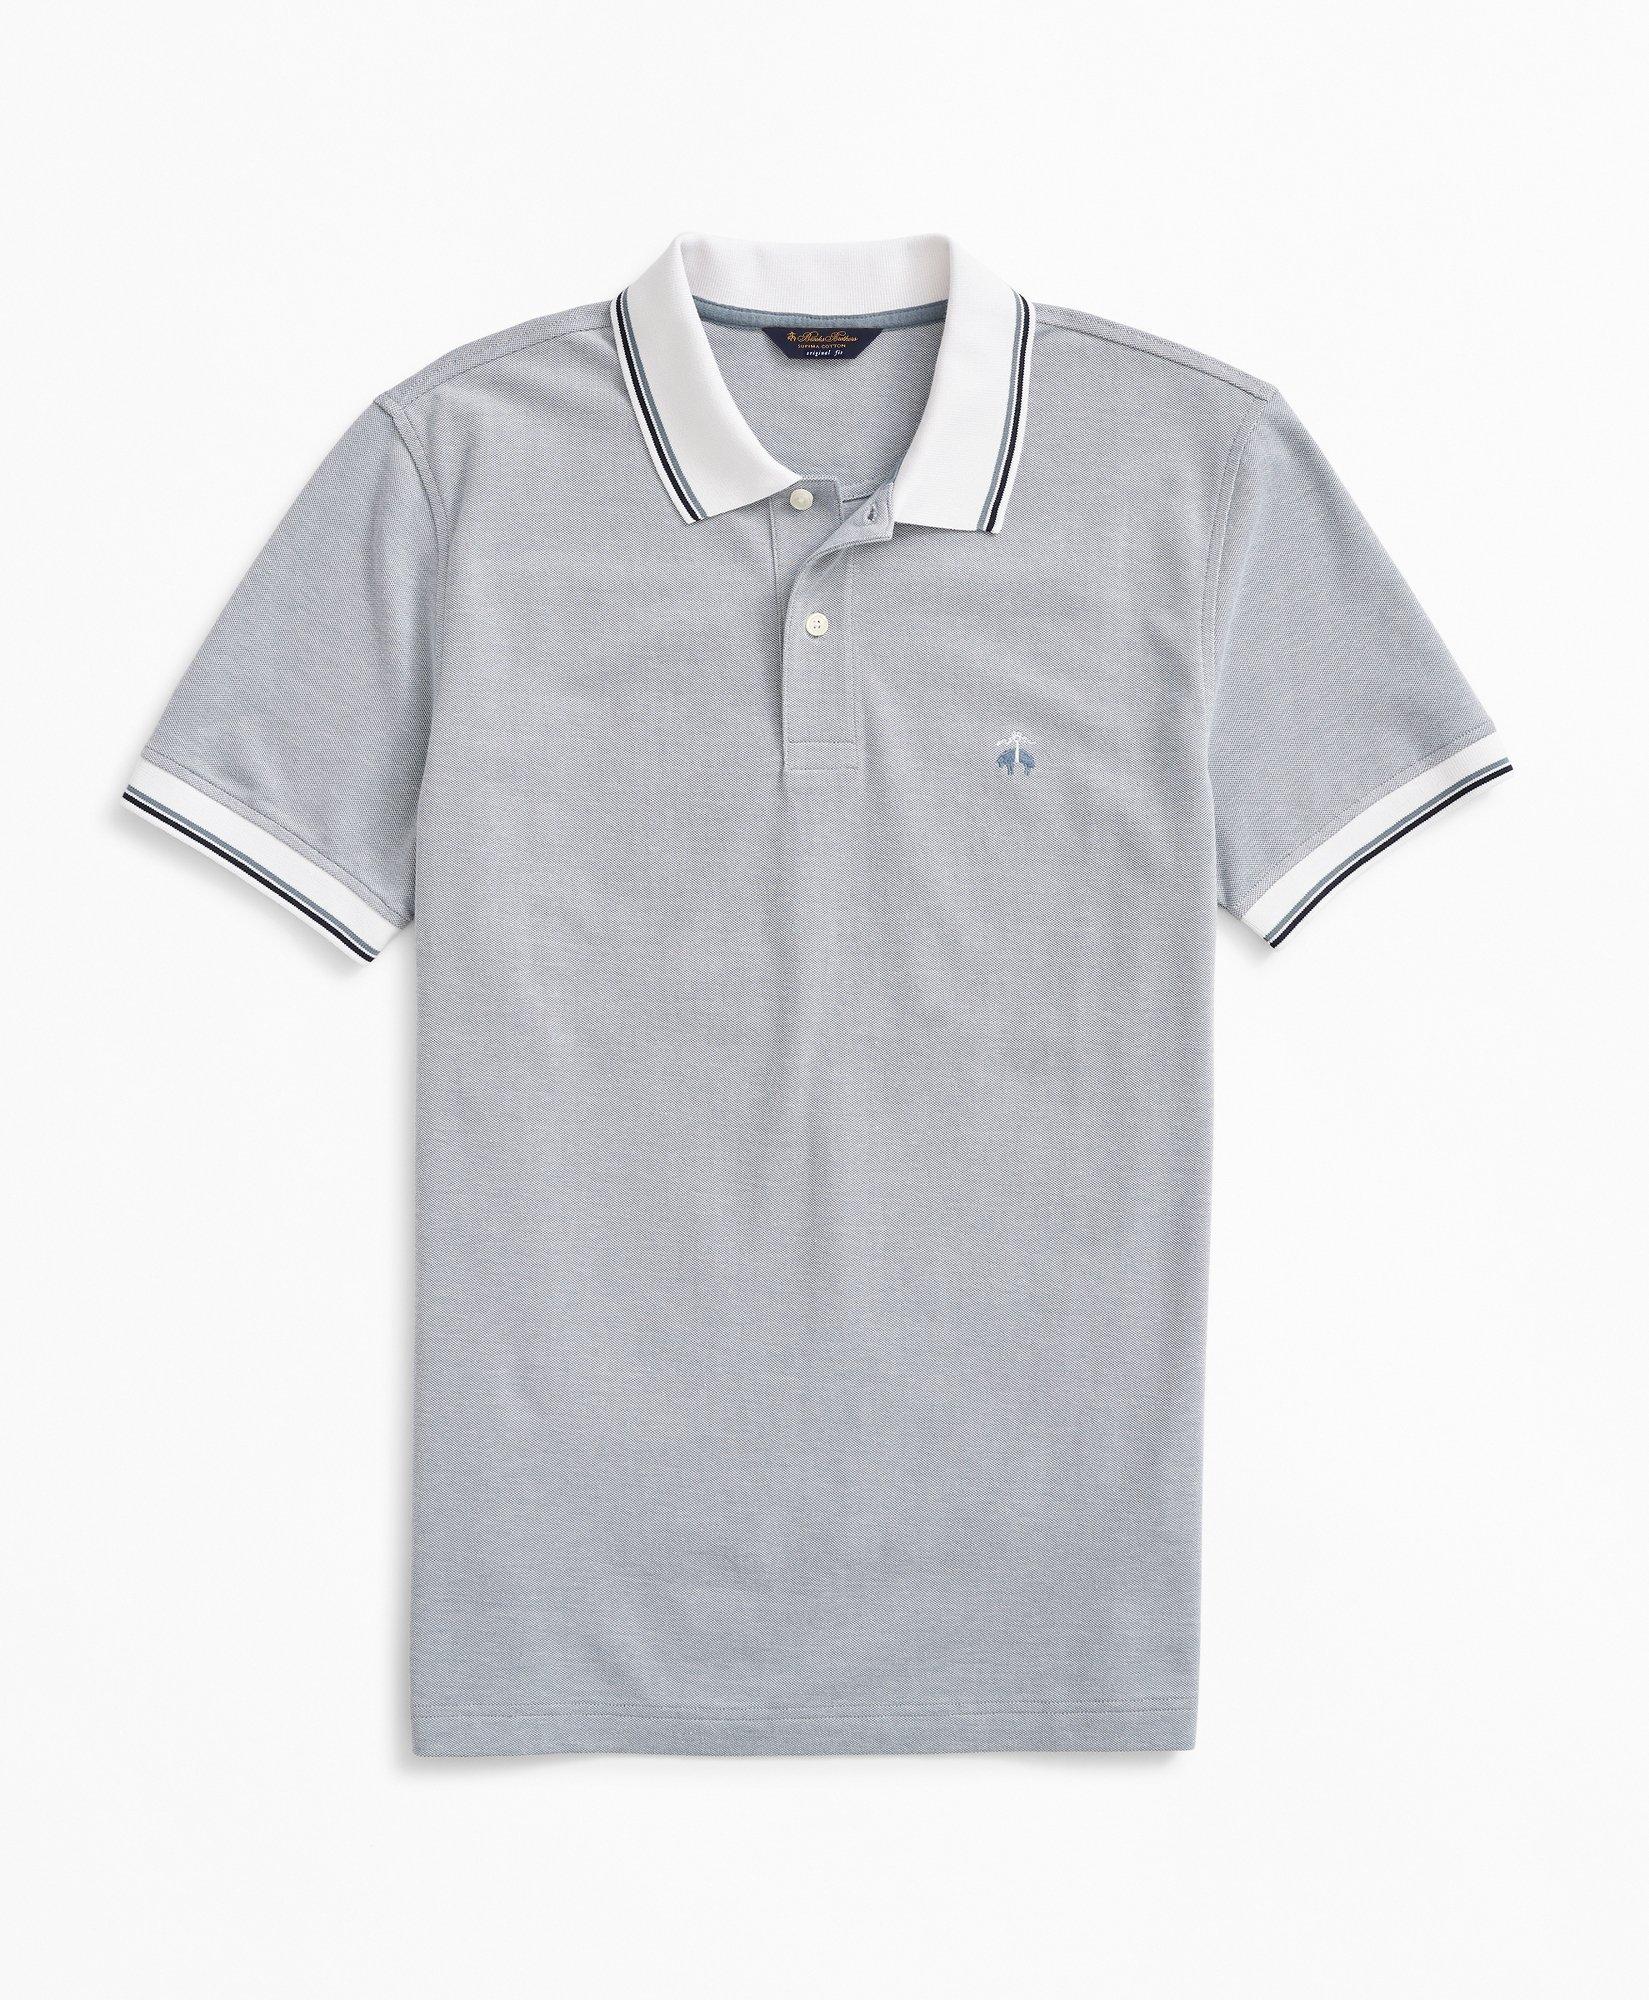 meesteres dilemma vangst Men's Polo Shirts & T-Shirts on Sale | Brooks Brothers